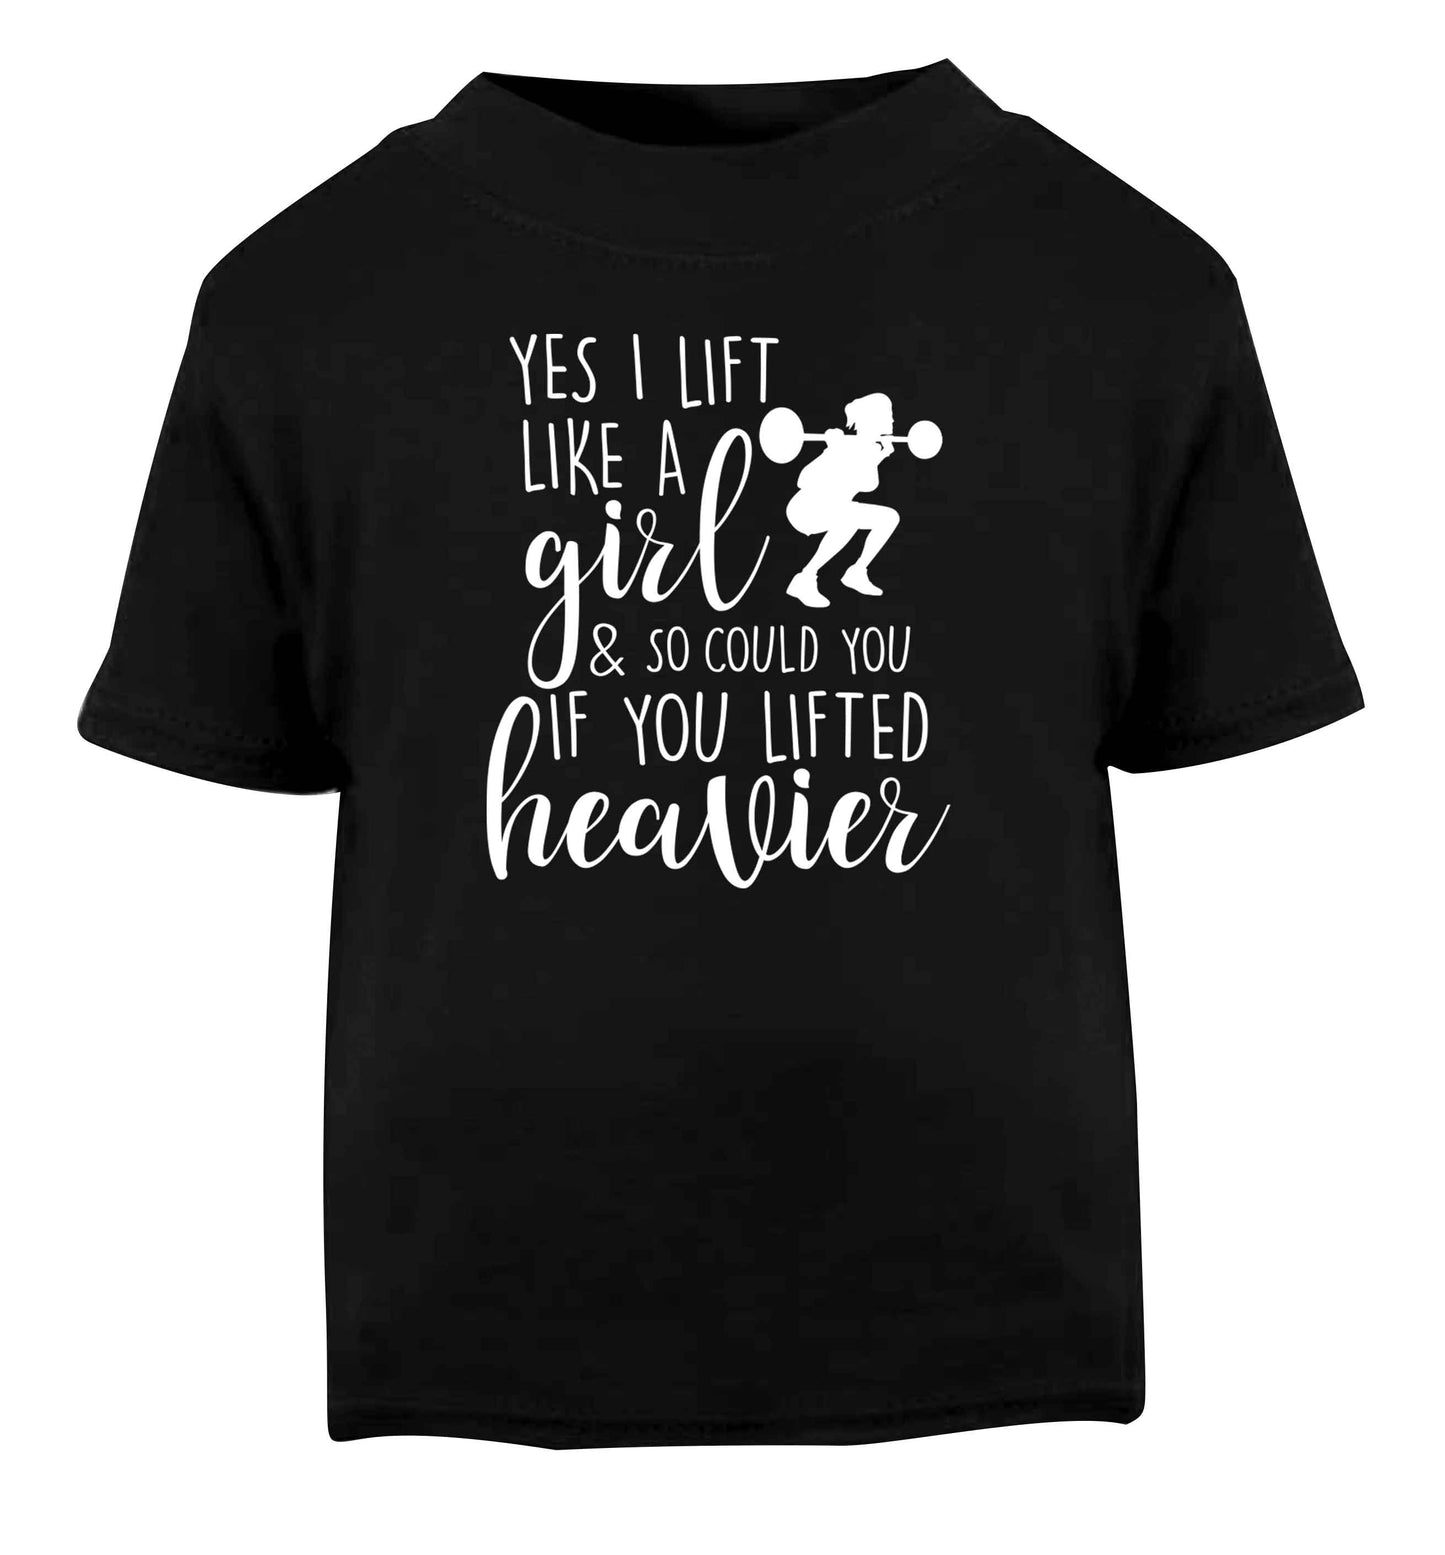 Yes I lift like a girl and so could you if you lifted heavier Black Baby Toddler Tshirt 2 years